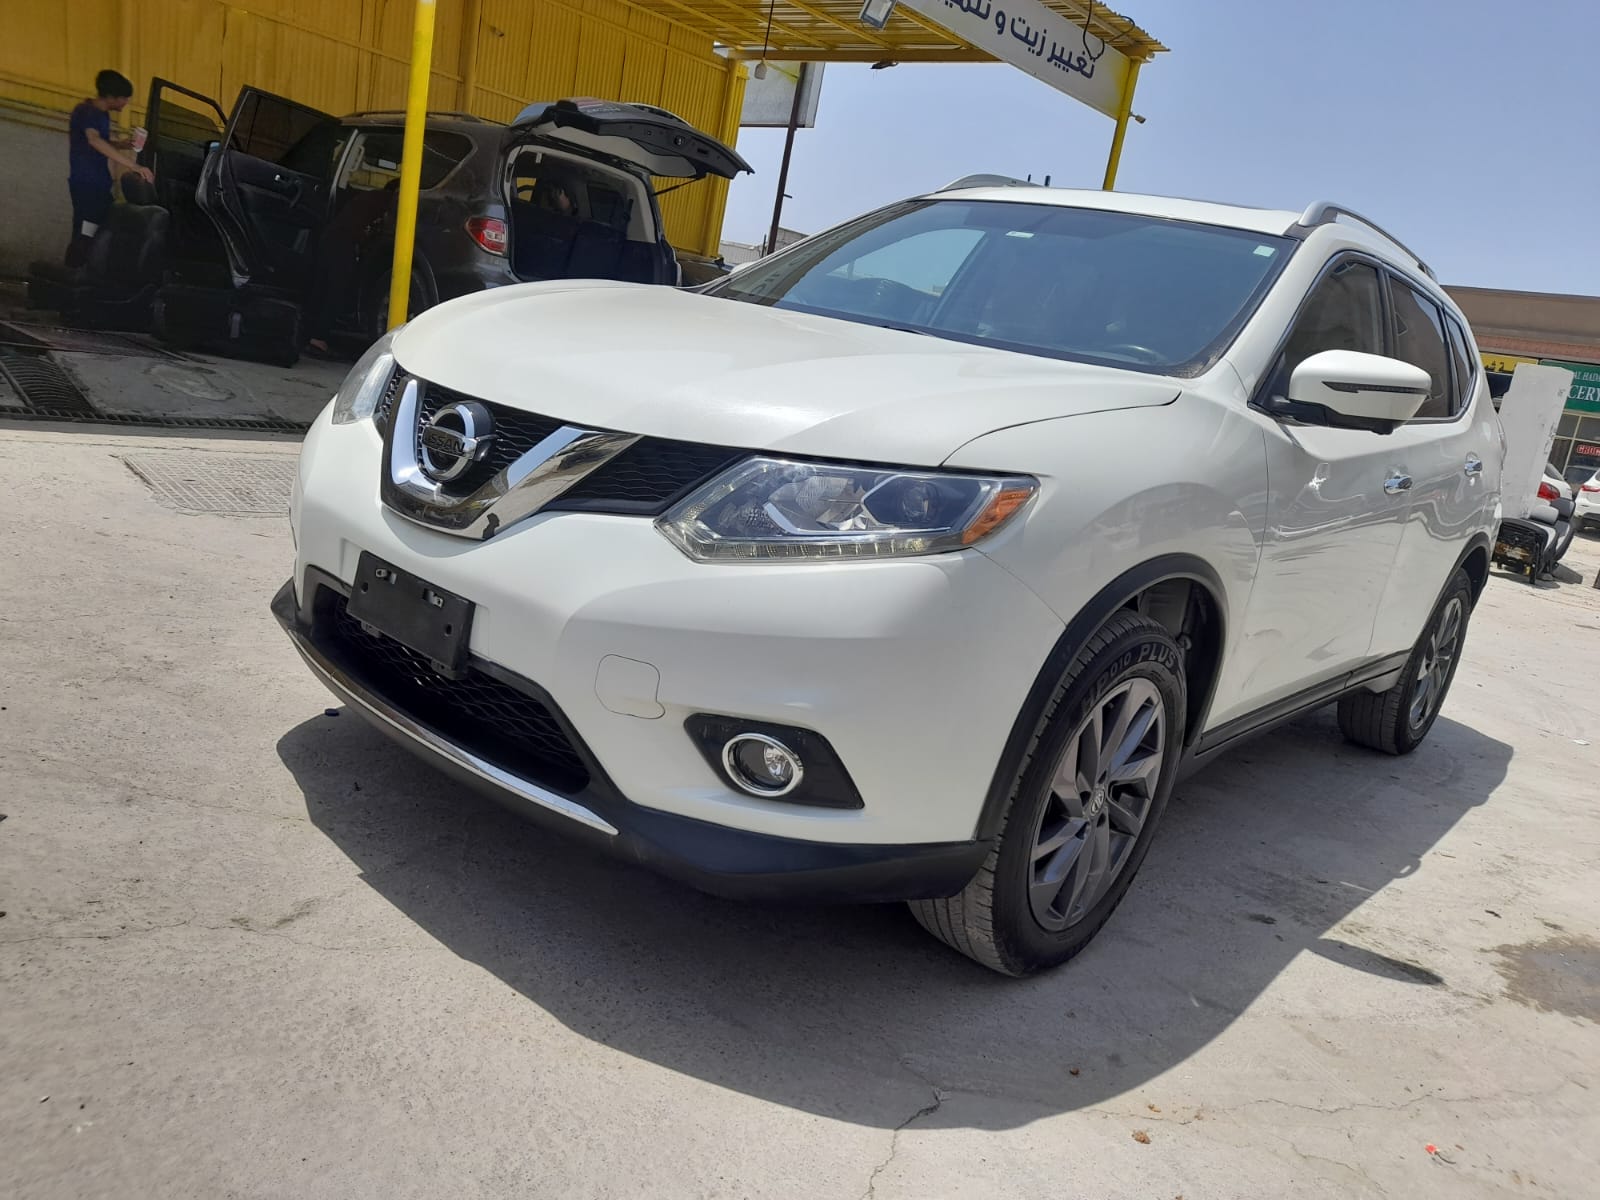 For Sale NISSAN ROGUE SL Panorama Model 2016 2.5 L V4